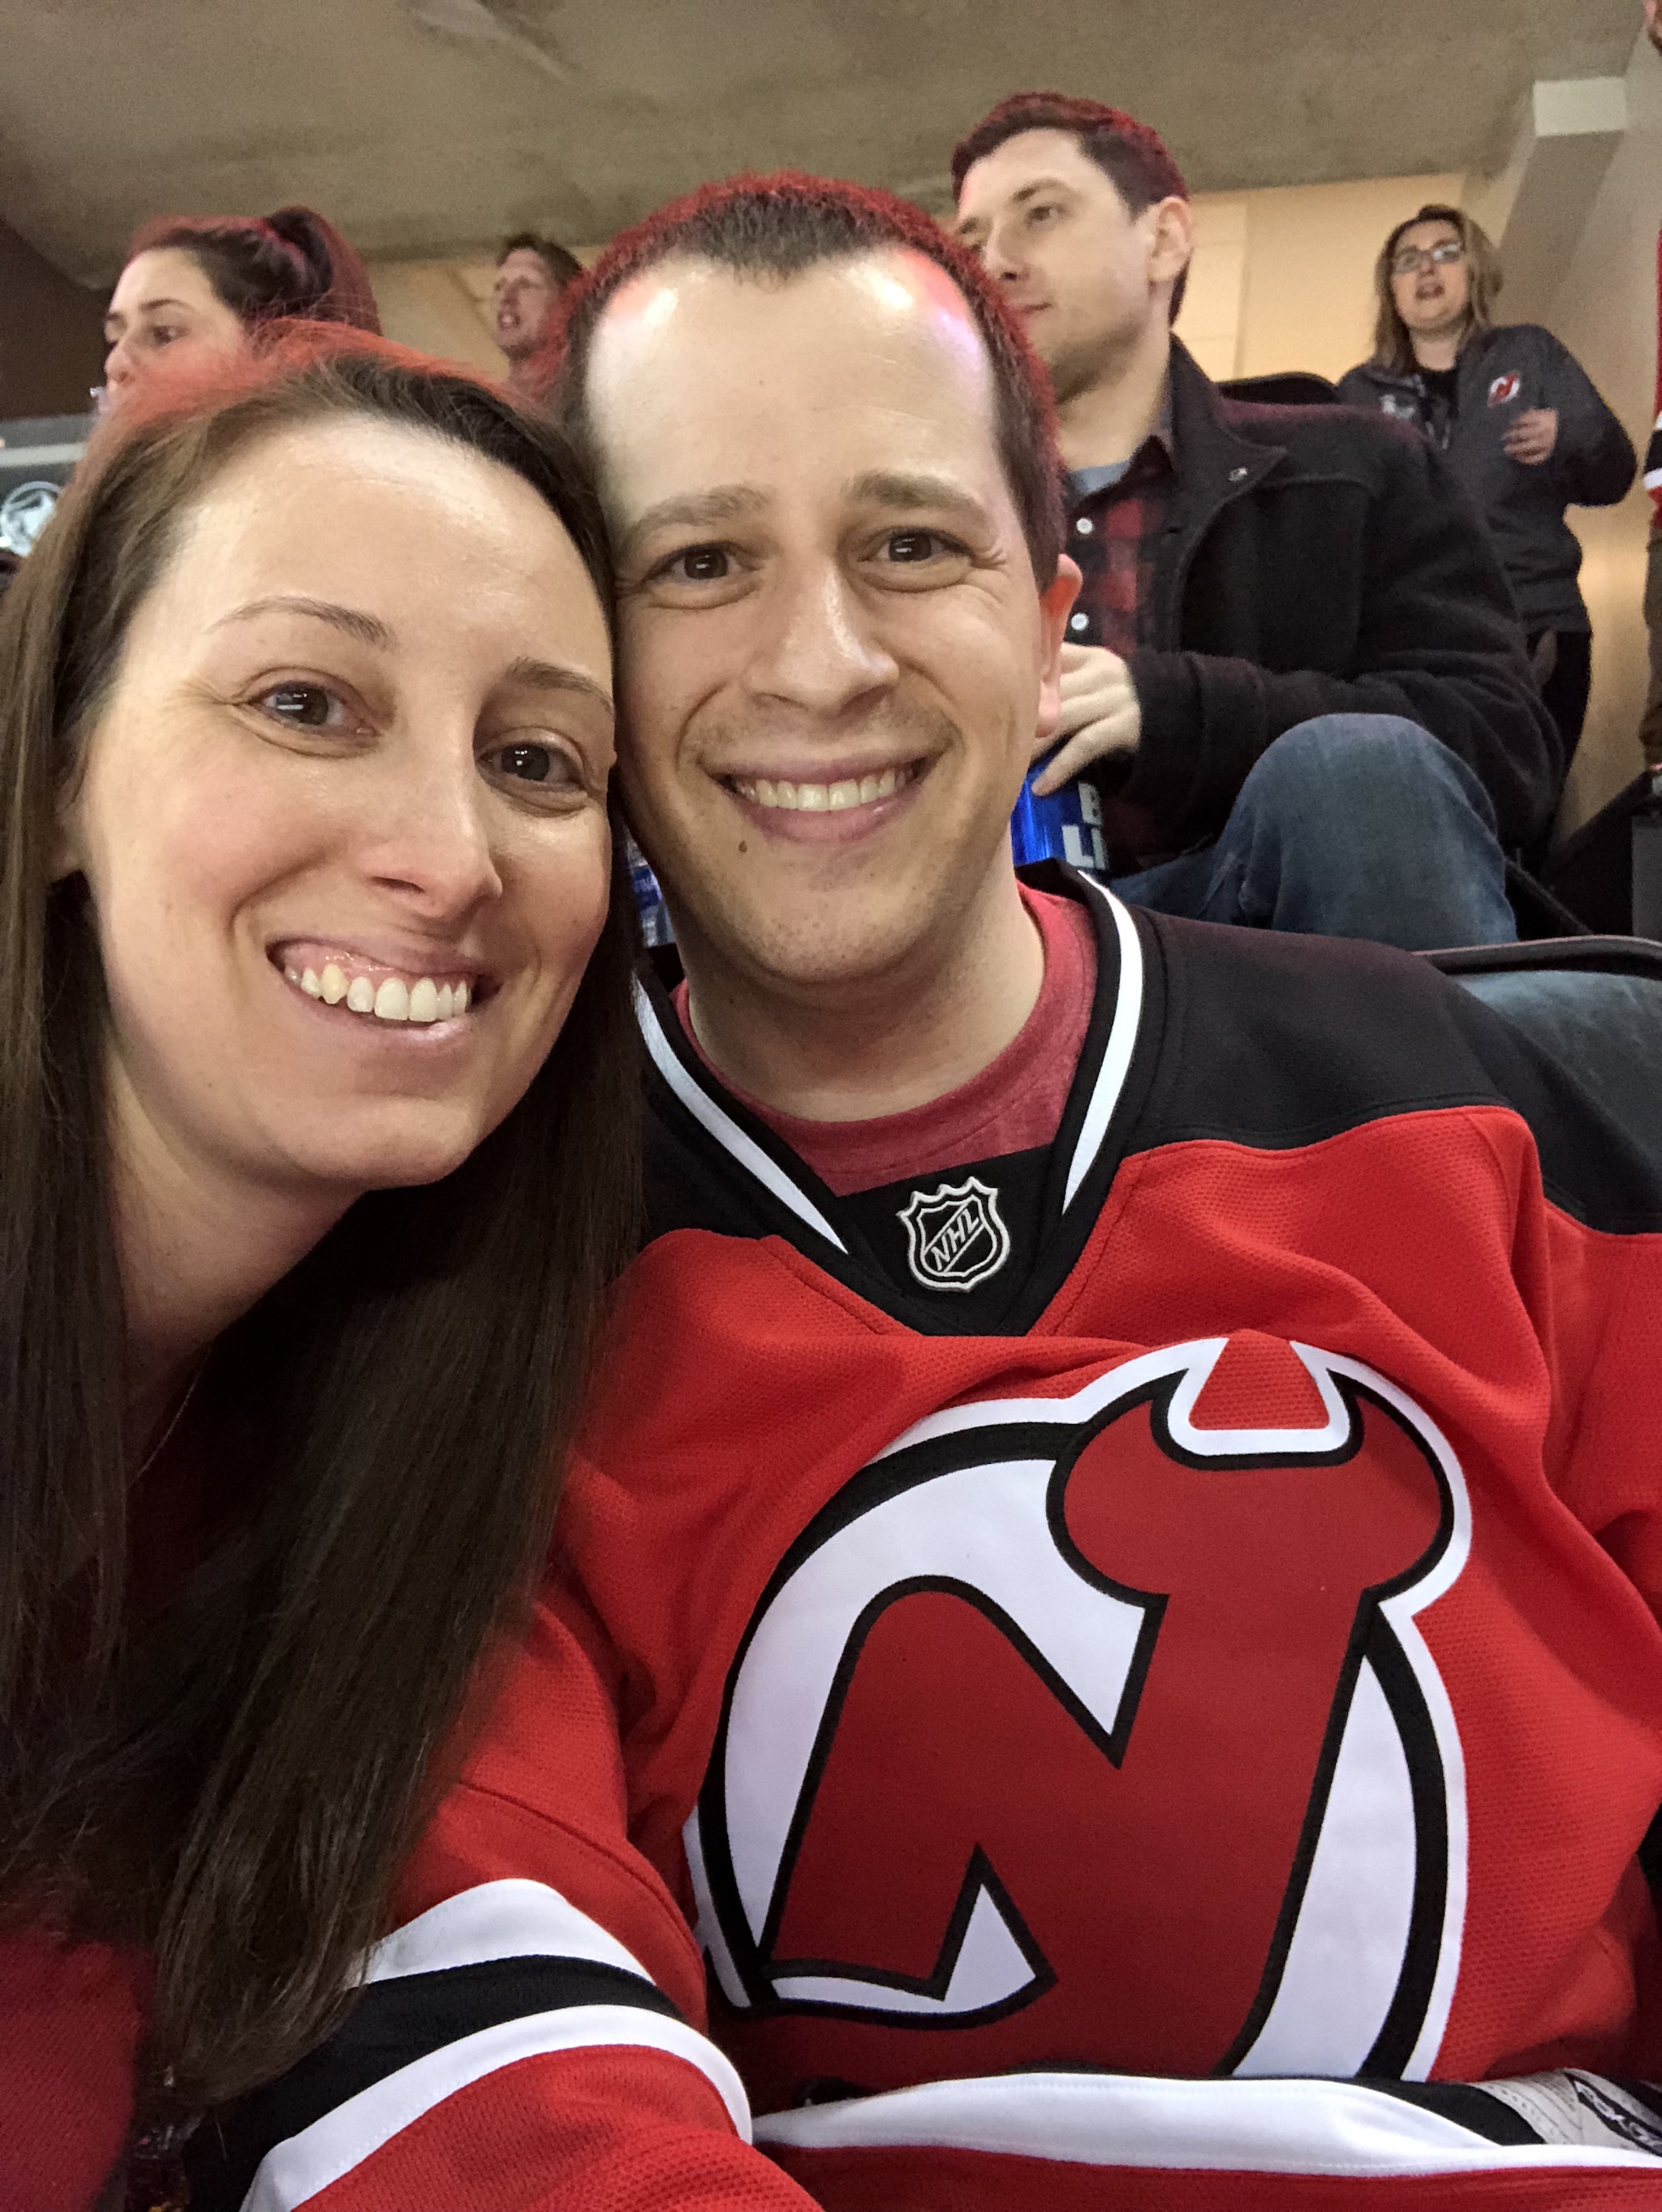 That Suite Life with the New Jersey Devils by popular New Jersey blogger, What's For Dinner Esq.